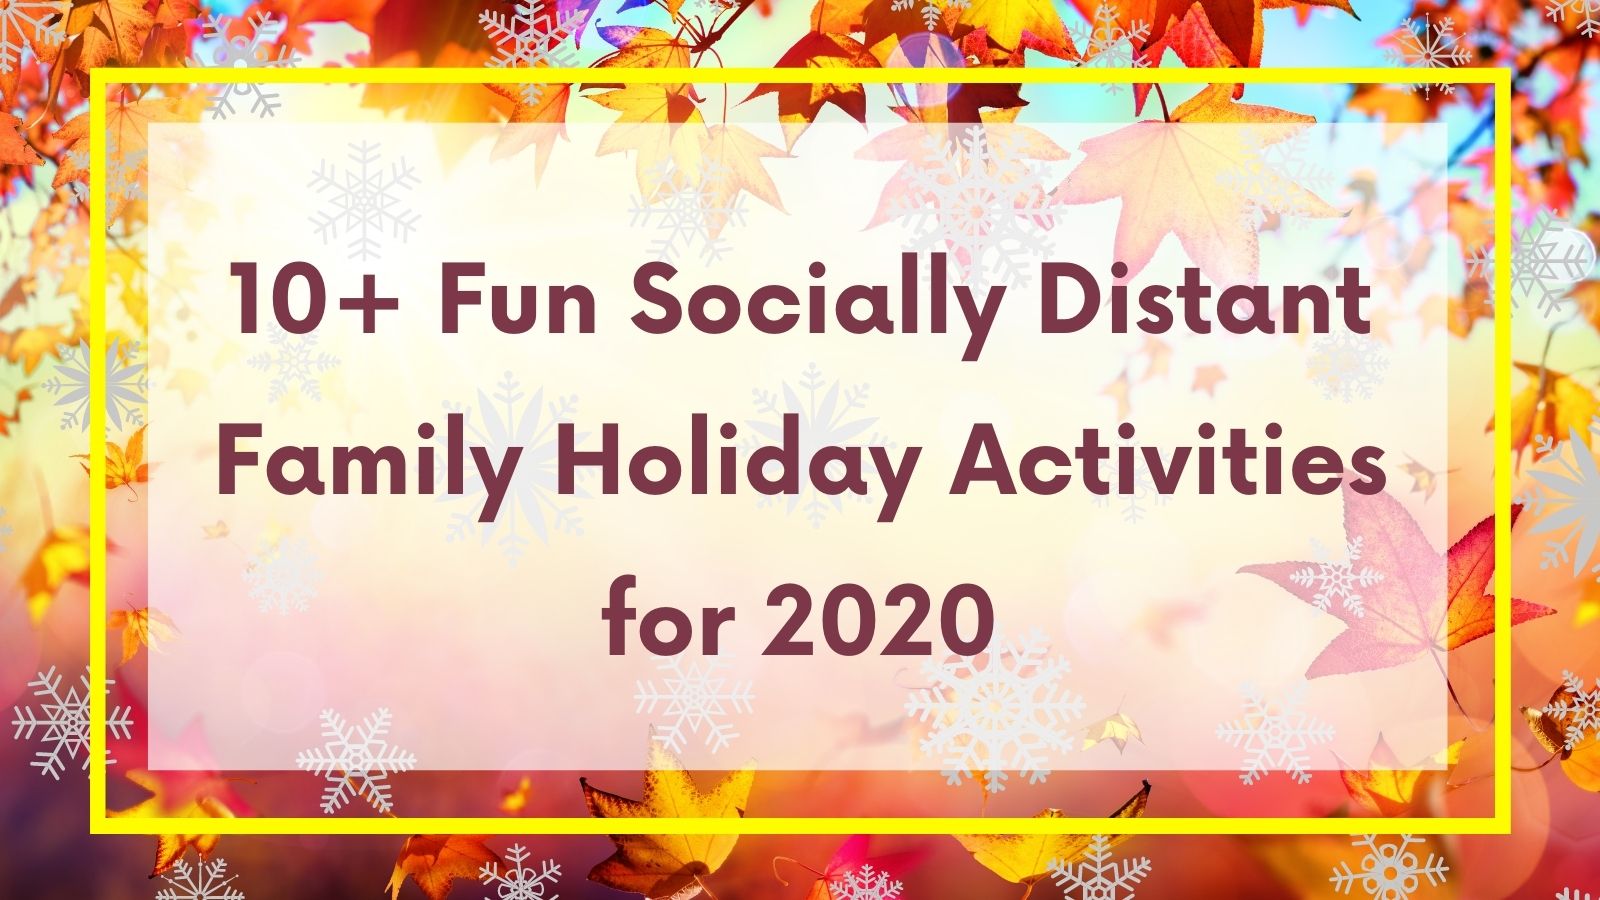 Socially Distant Family Holiday Activities